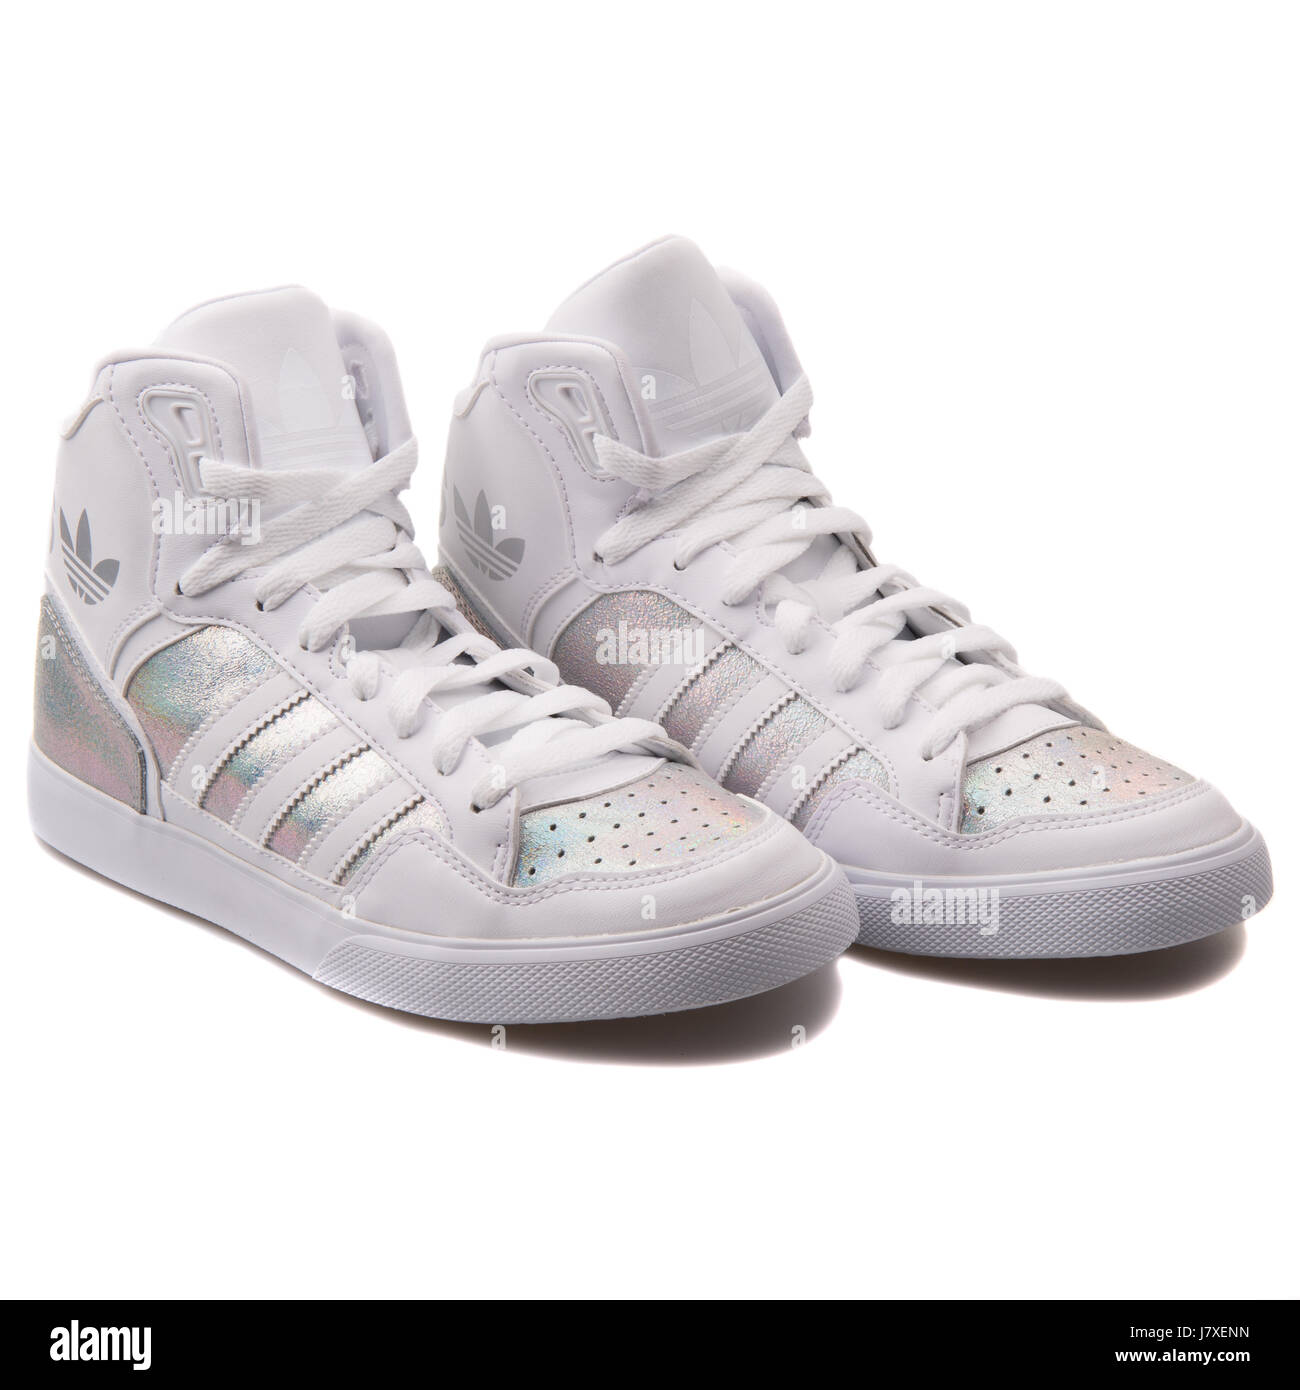 Adidas Extaball W Women's Iridescent White with Metallic Silver Leather  Sneakers - S77398 Stock Photo - Alamy